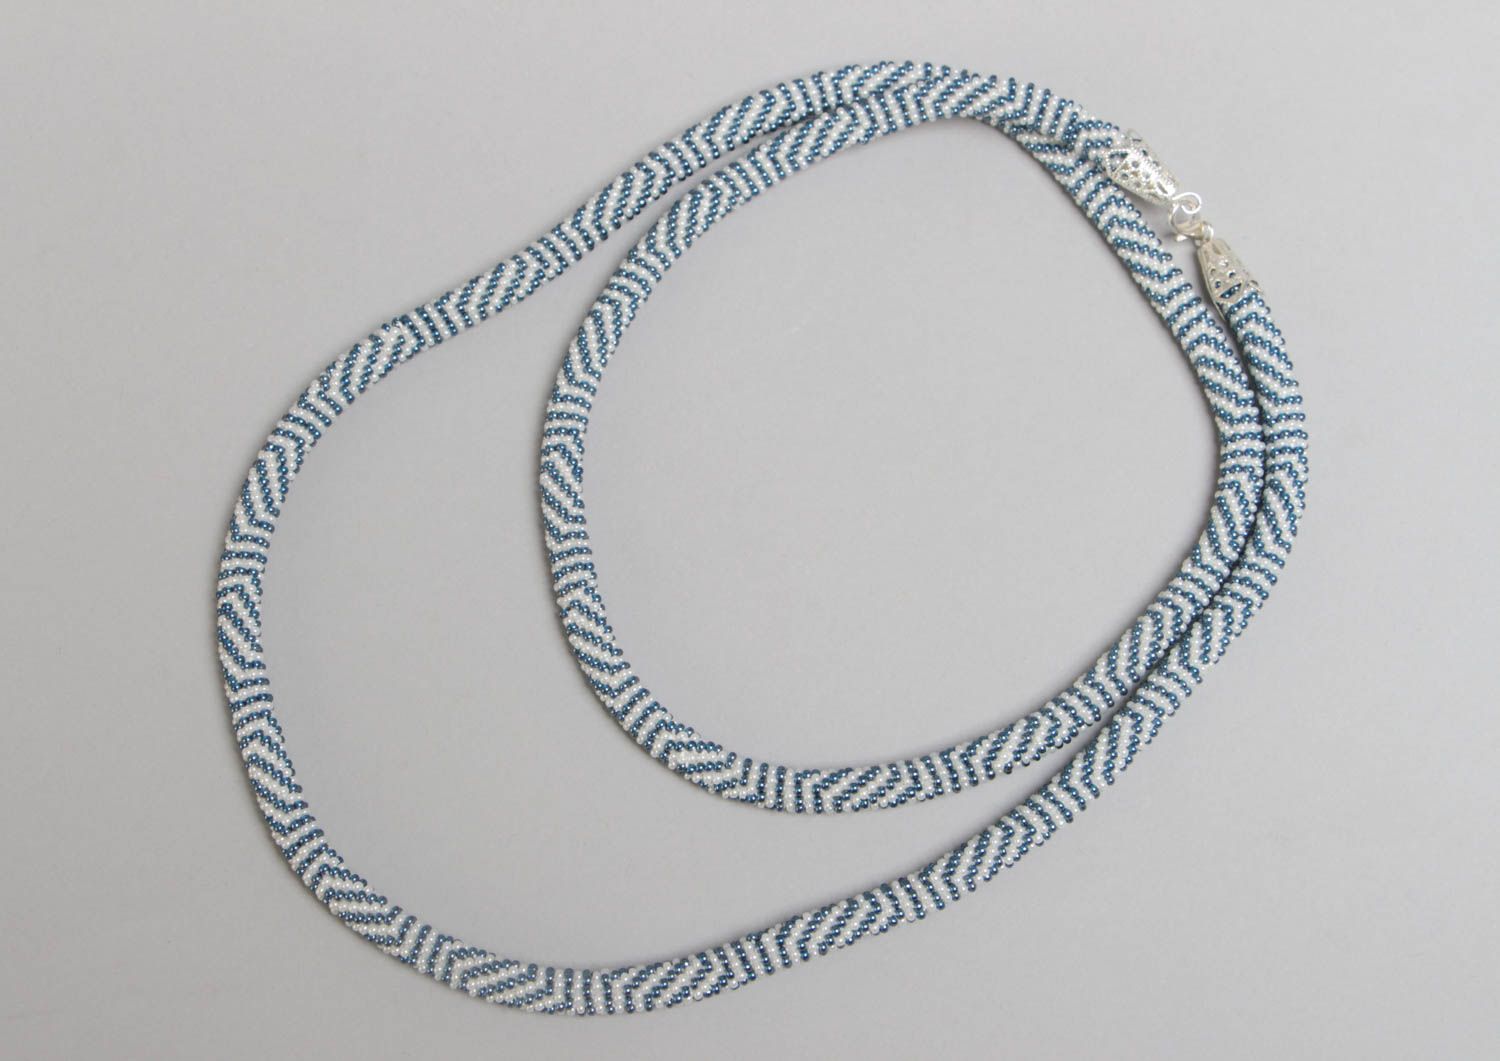 Handmade long white and blue striped beaded cord necklace for stylish women photo 2